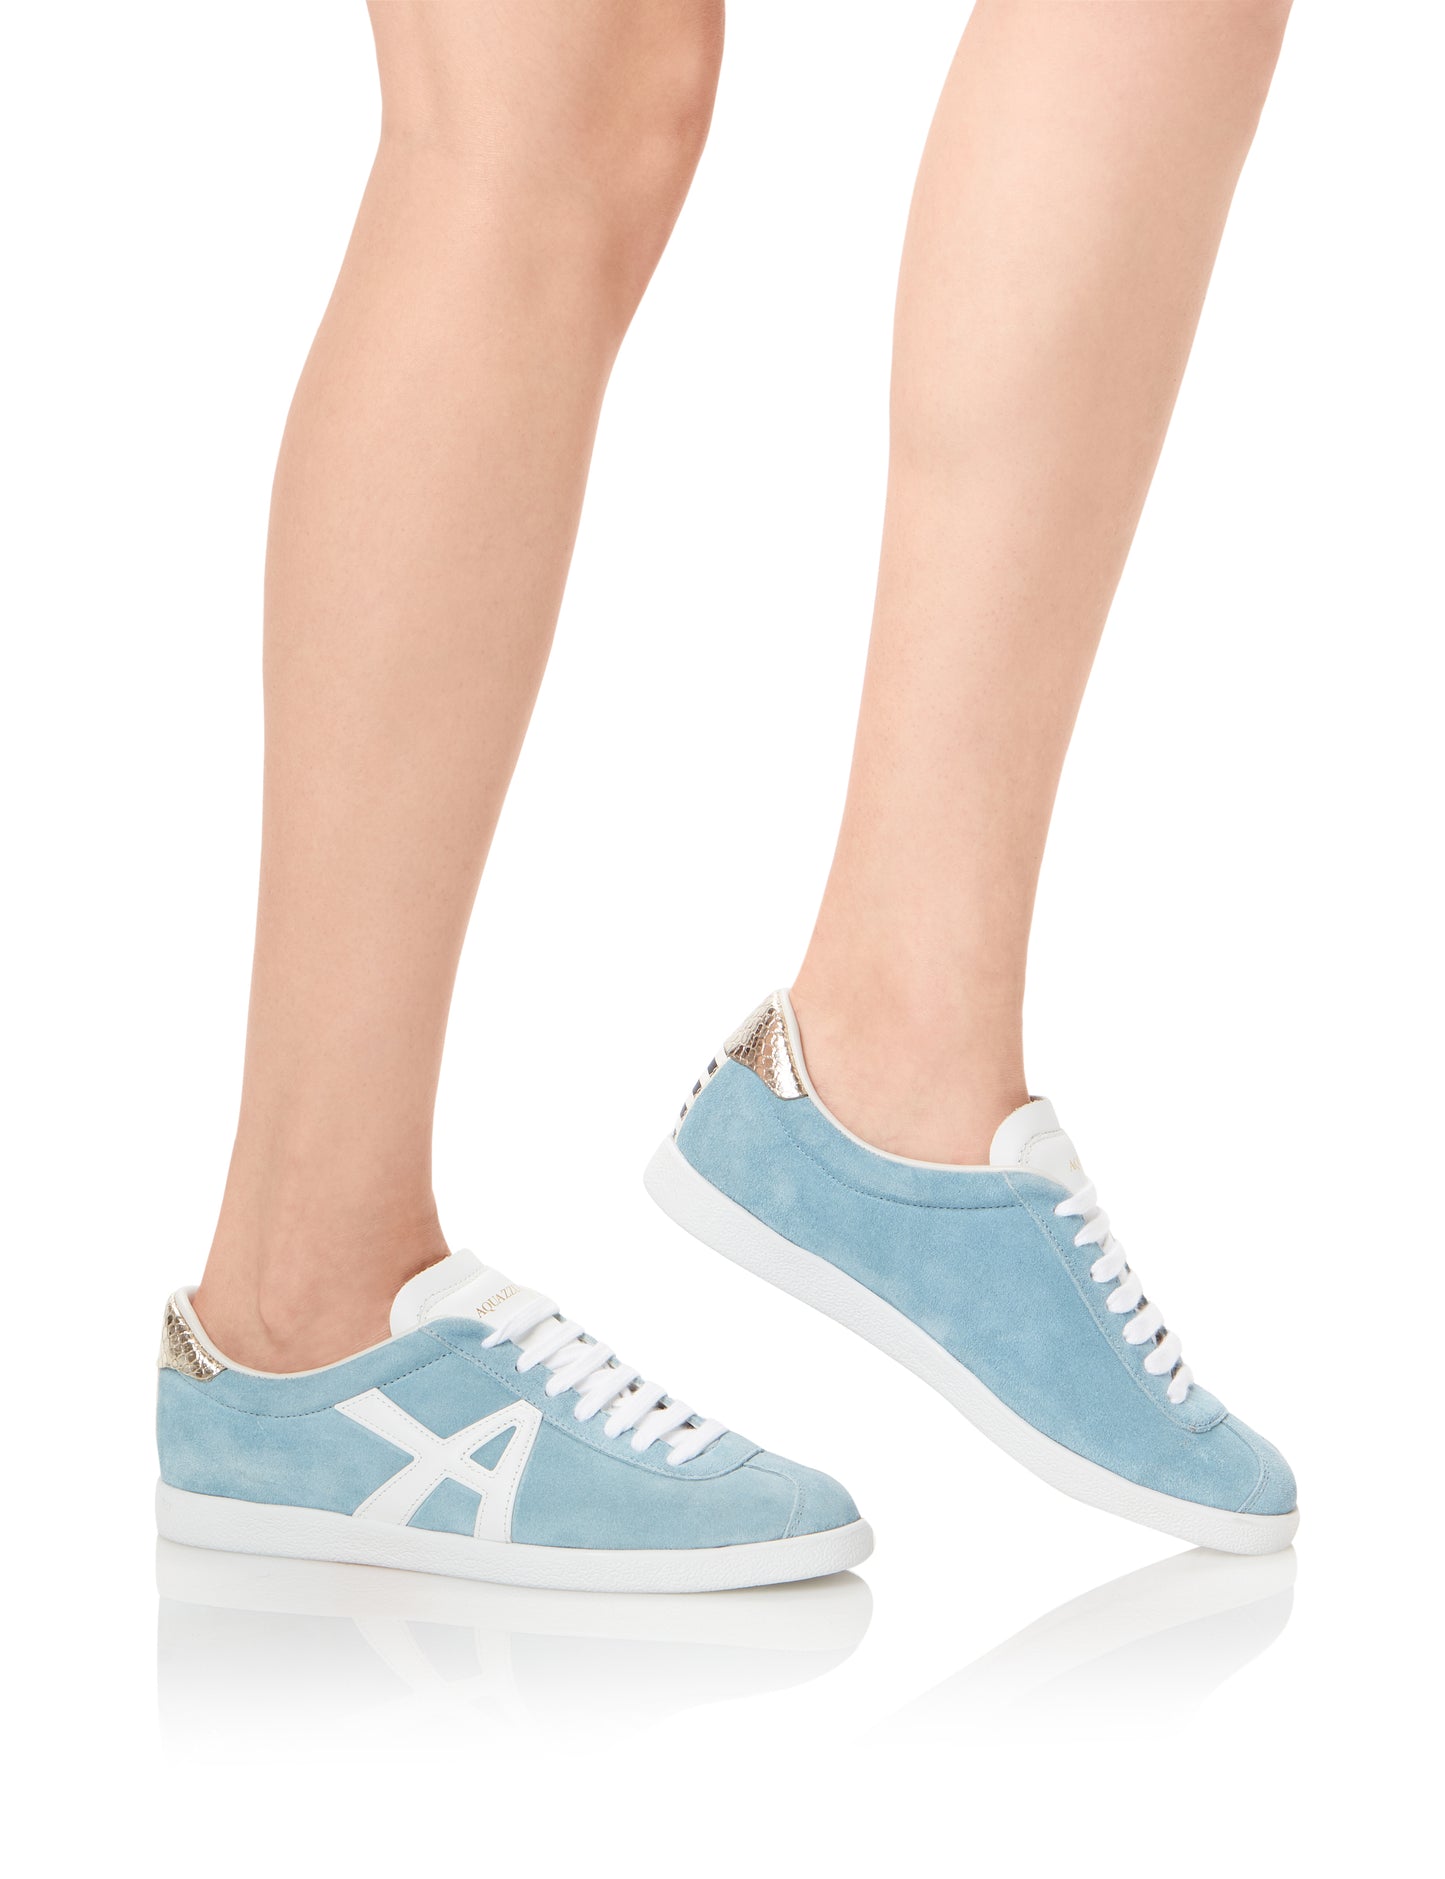 THE A SNEAKER SOFT BLUE/ WHITE/ SILVER